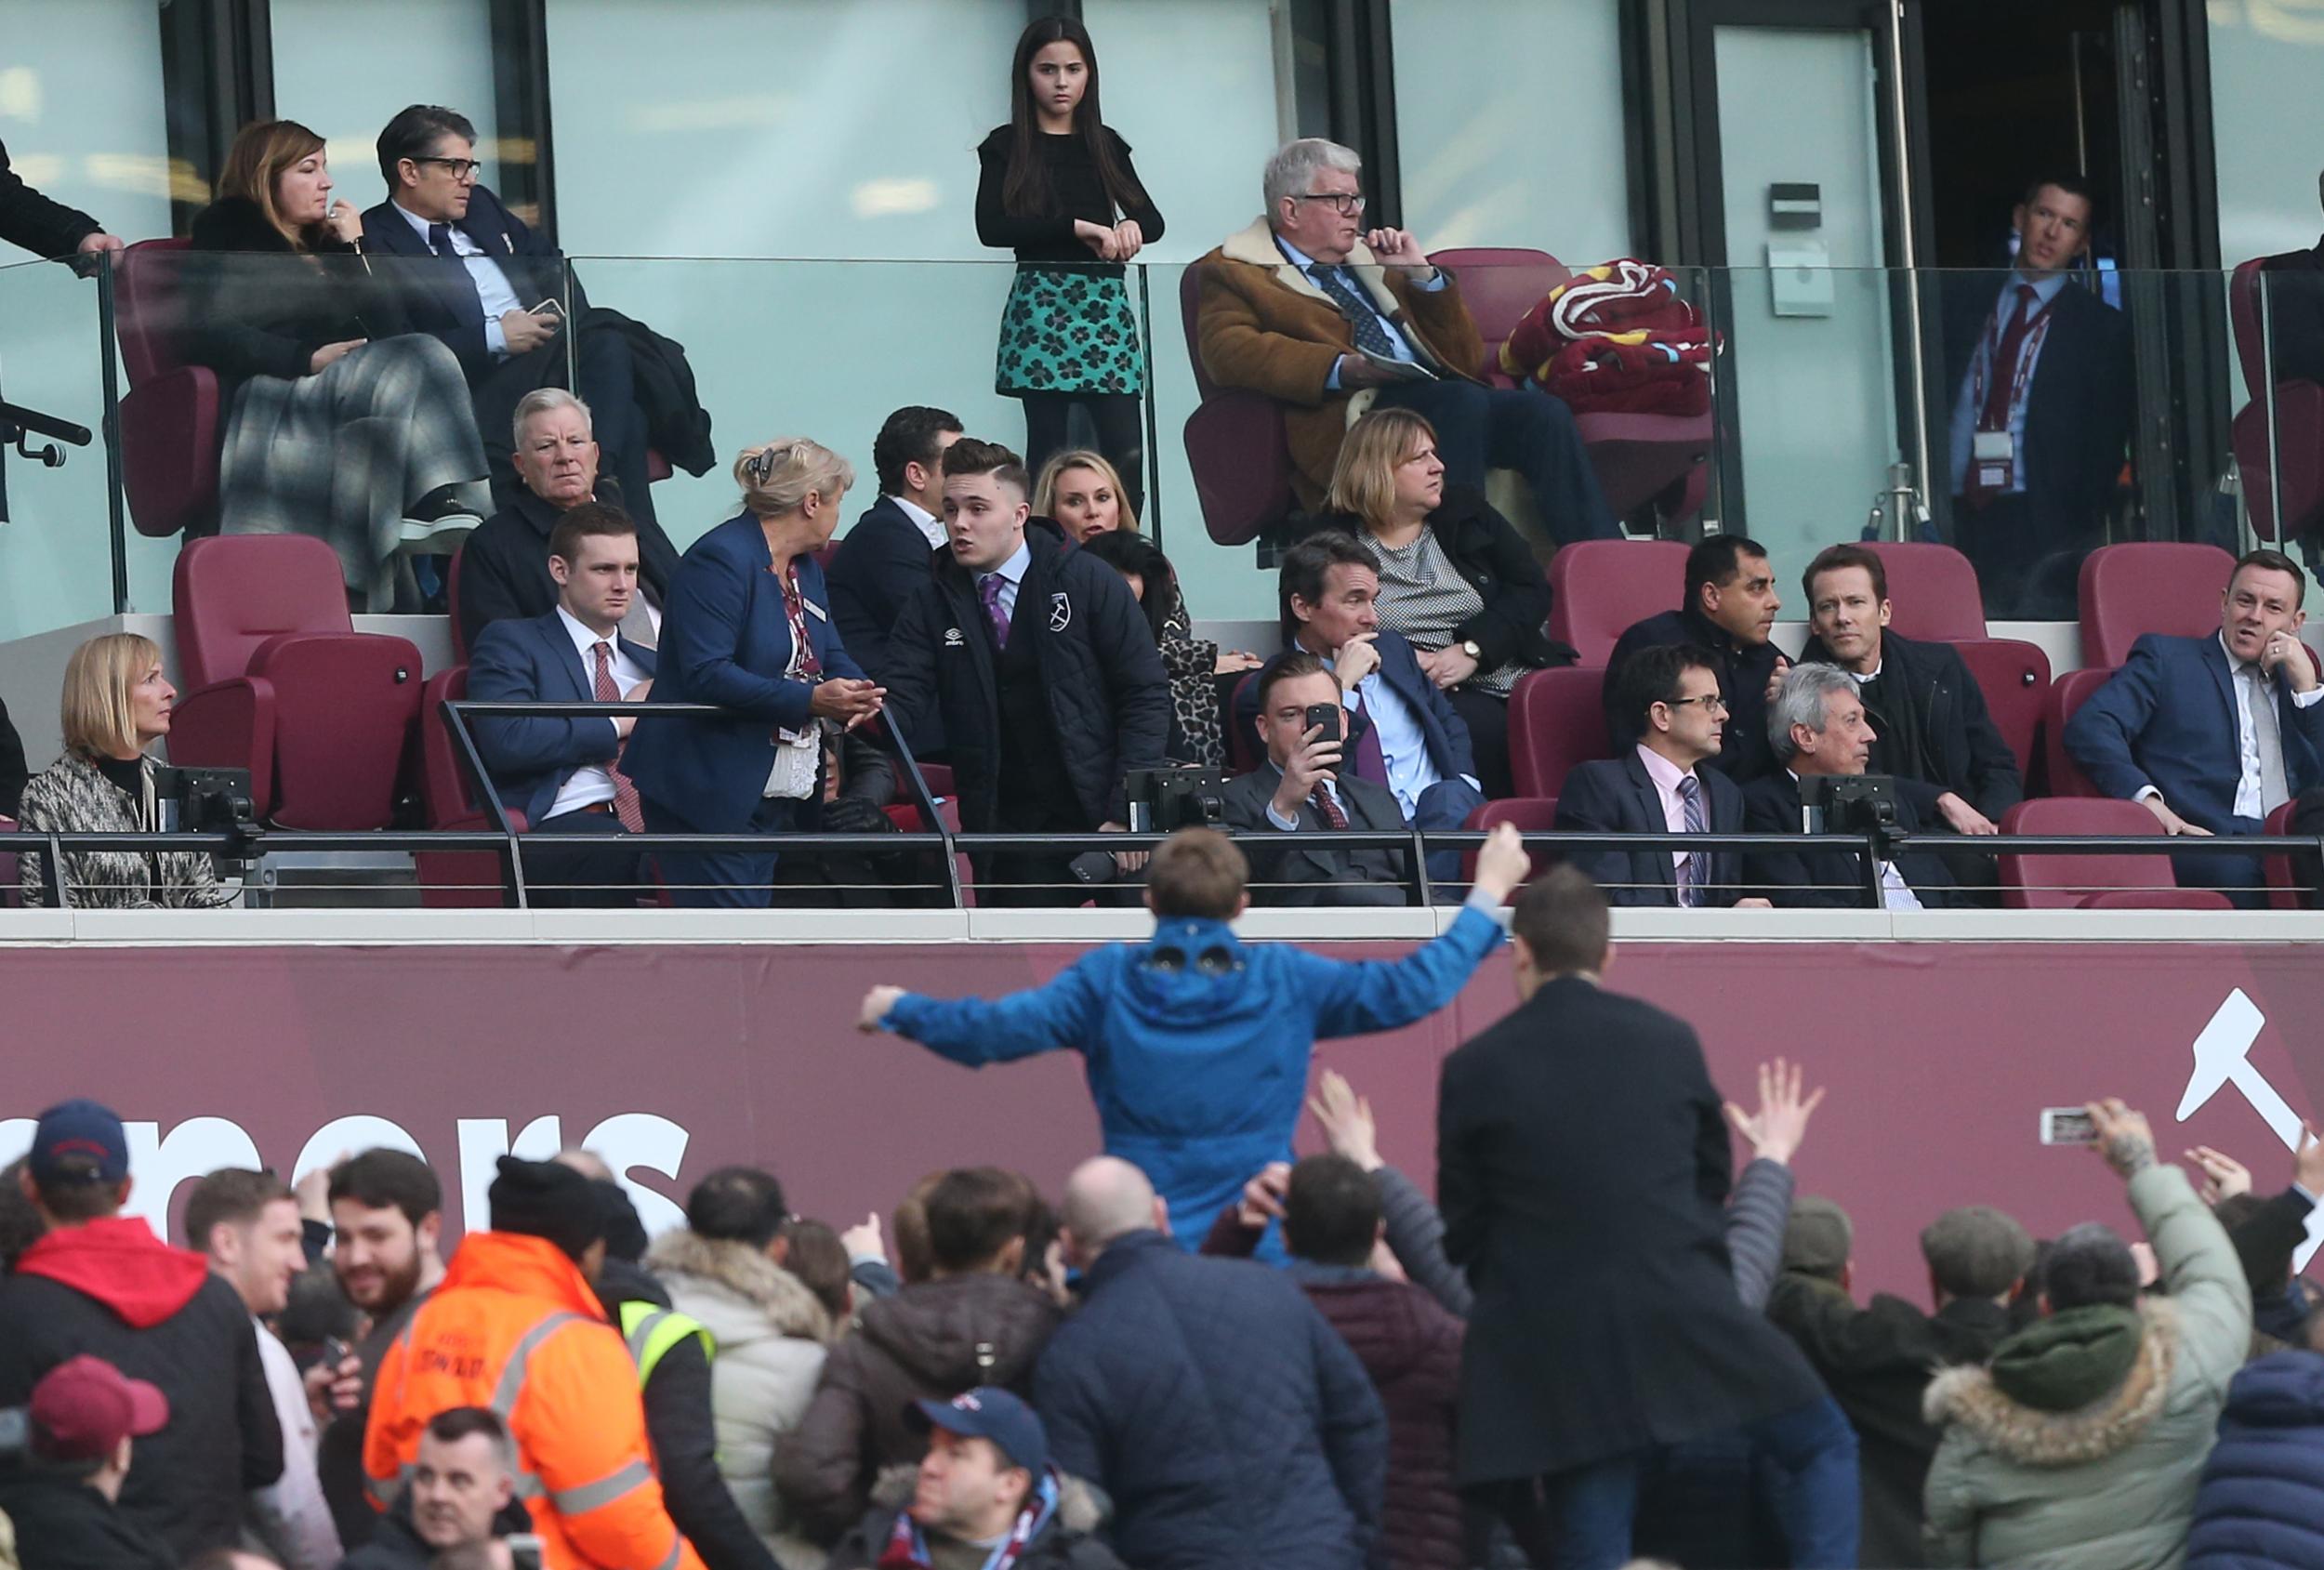 Fan riots spilled into the directors' box